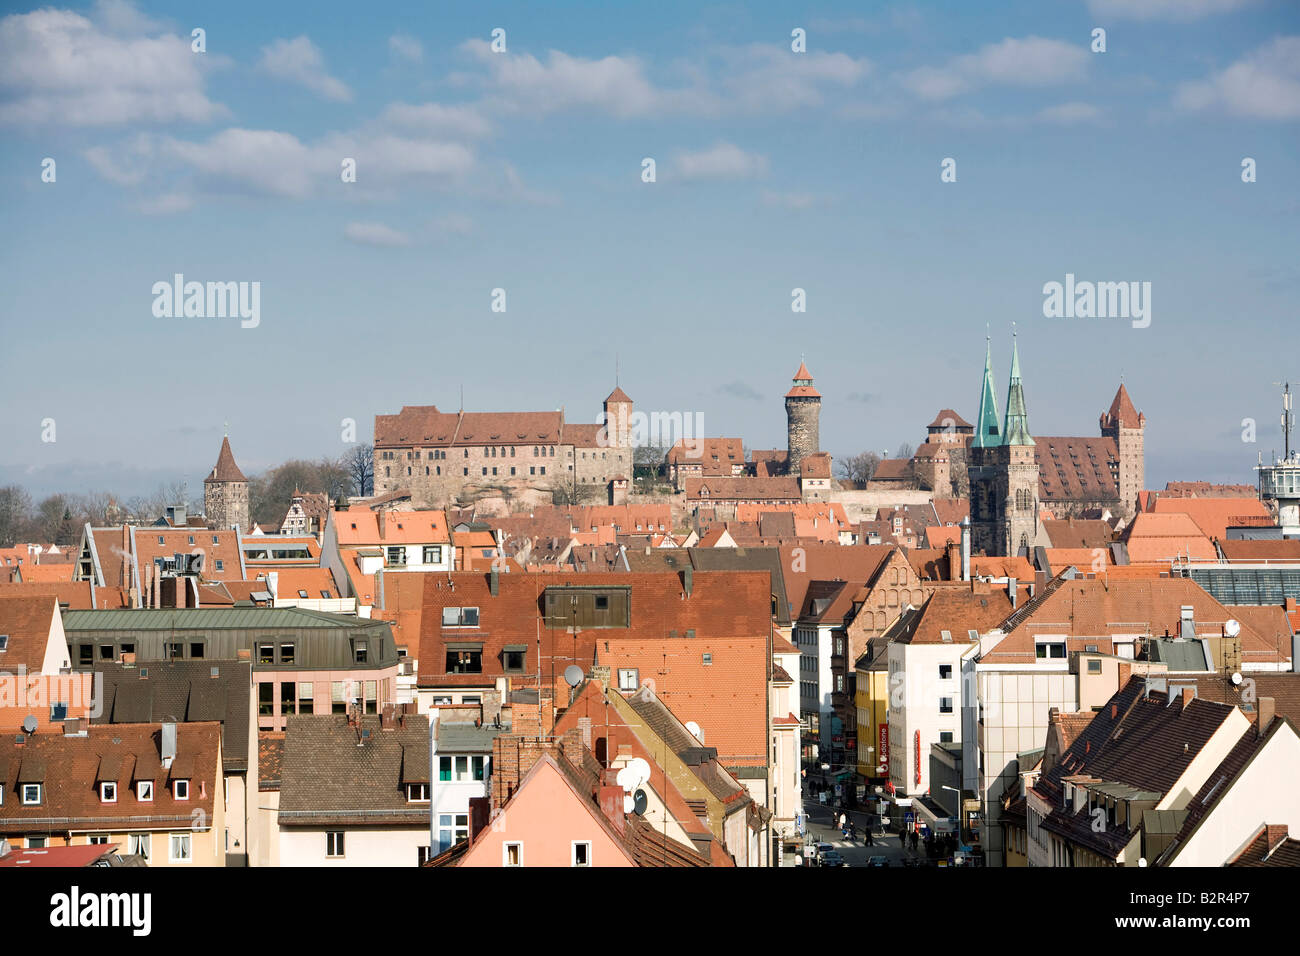 town of Nuremberg with castle and old town Stock Photo